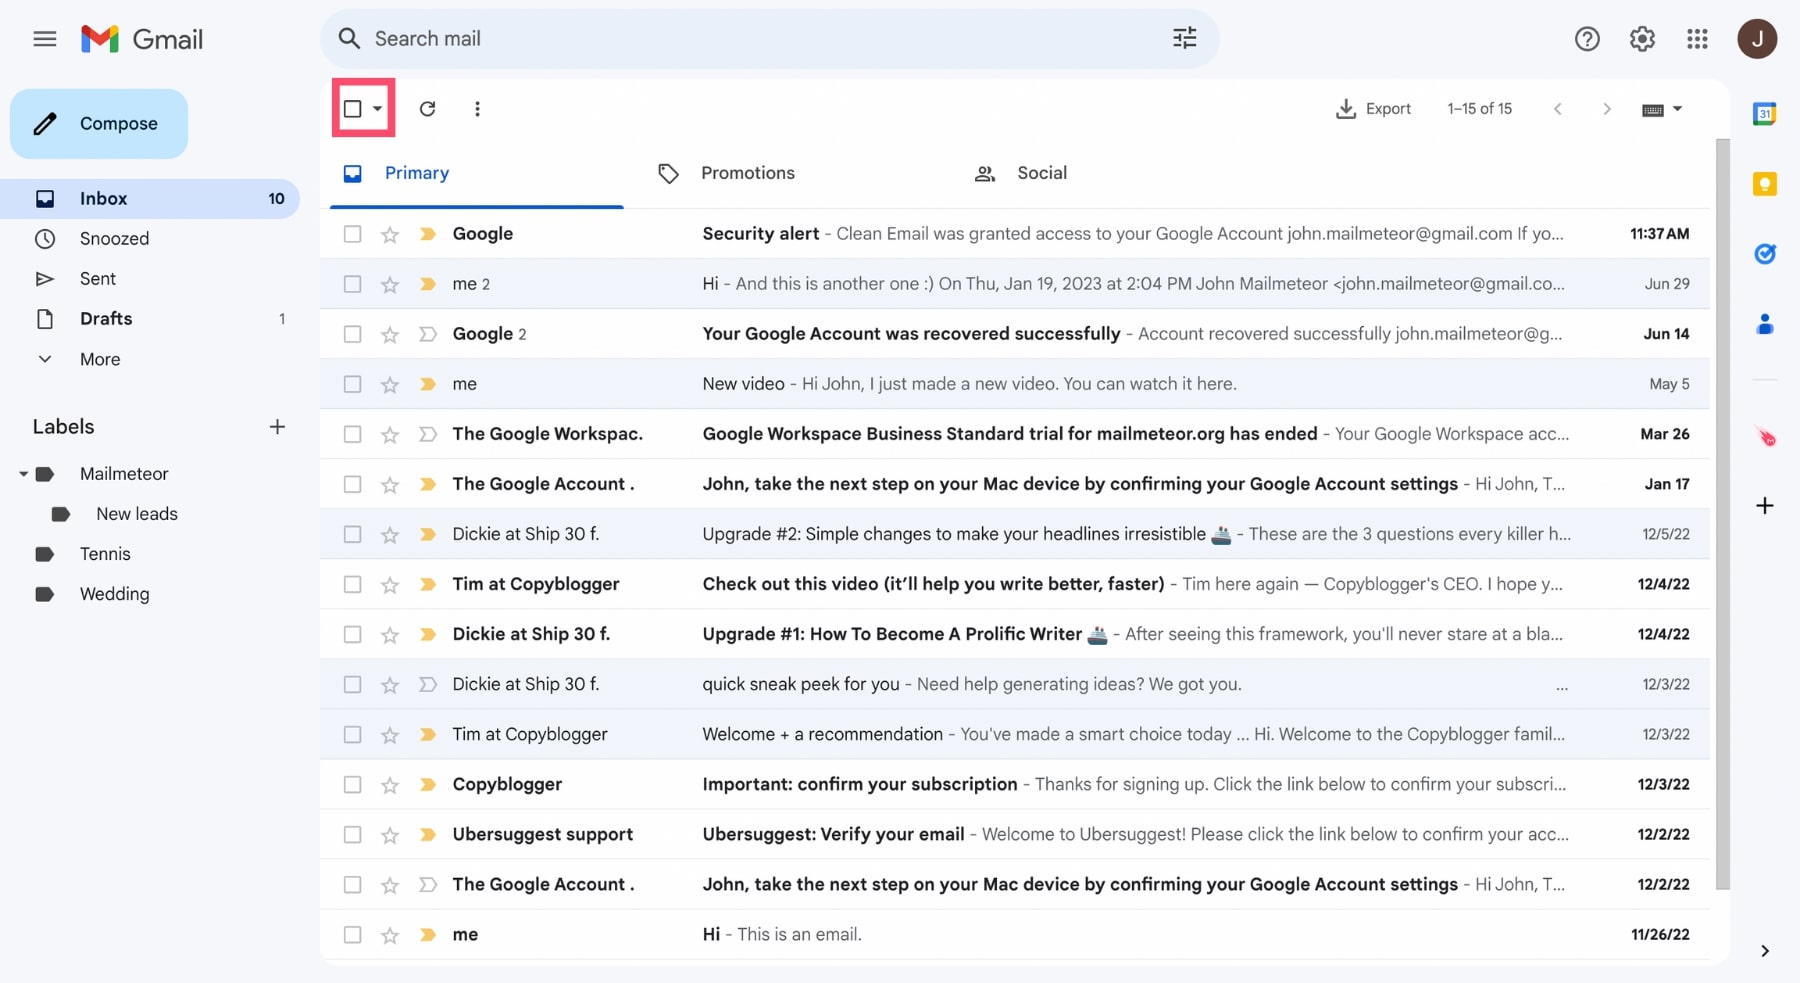 "Select all" feature in Gmail